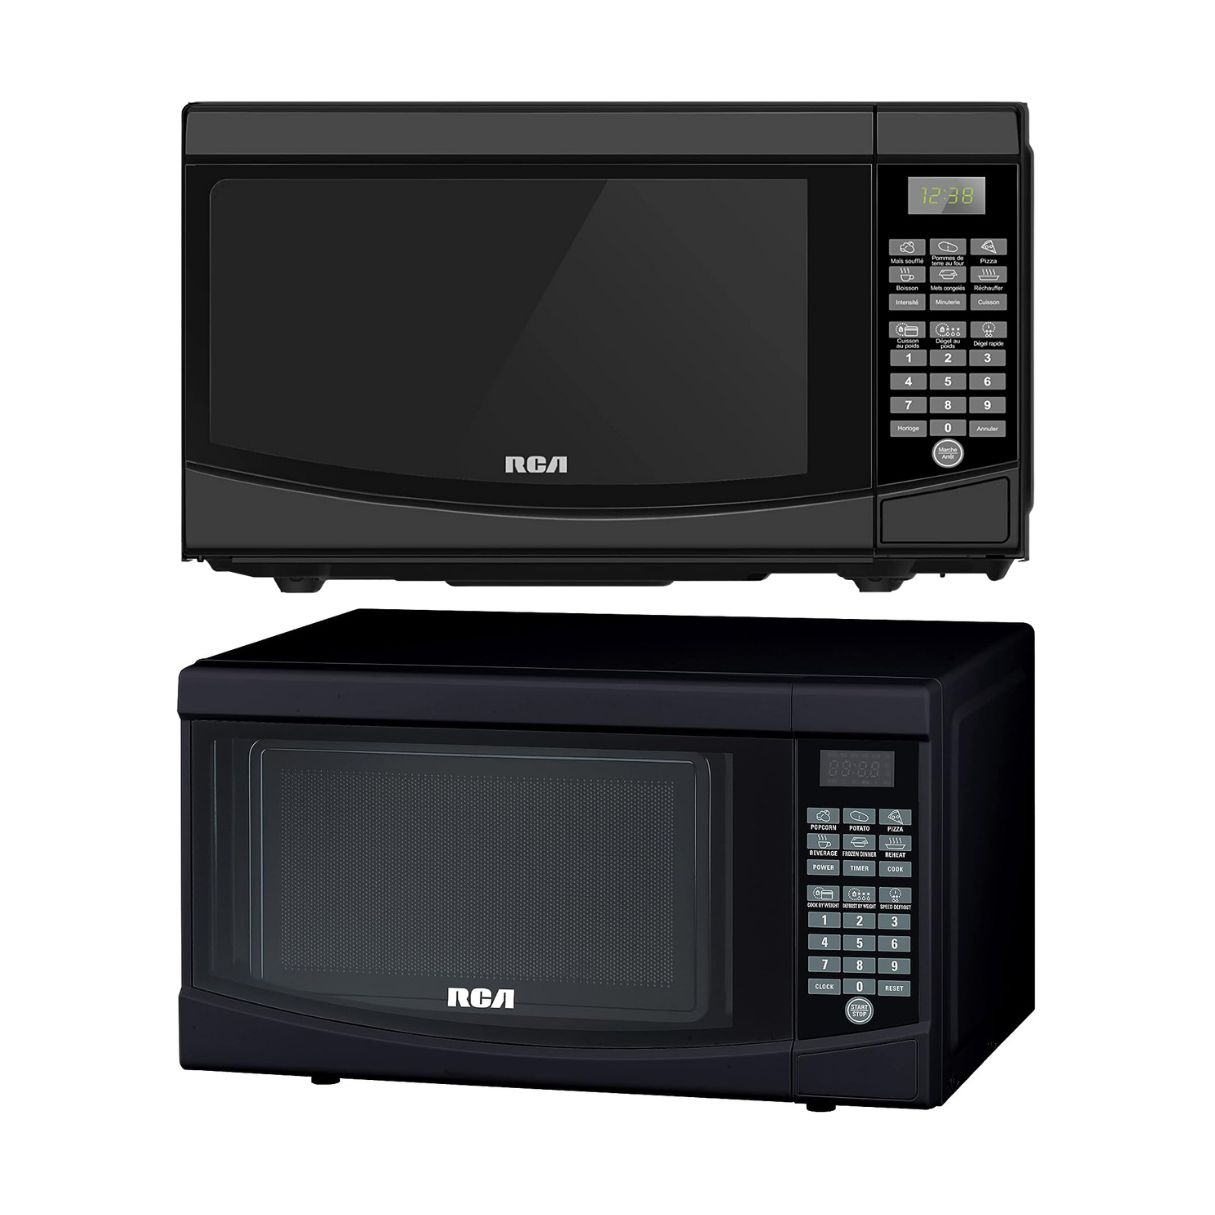 15 Amazing Rca Rmw733-Black Microwave Oven, 0.7 Cu. Ft., Black for 2023